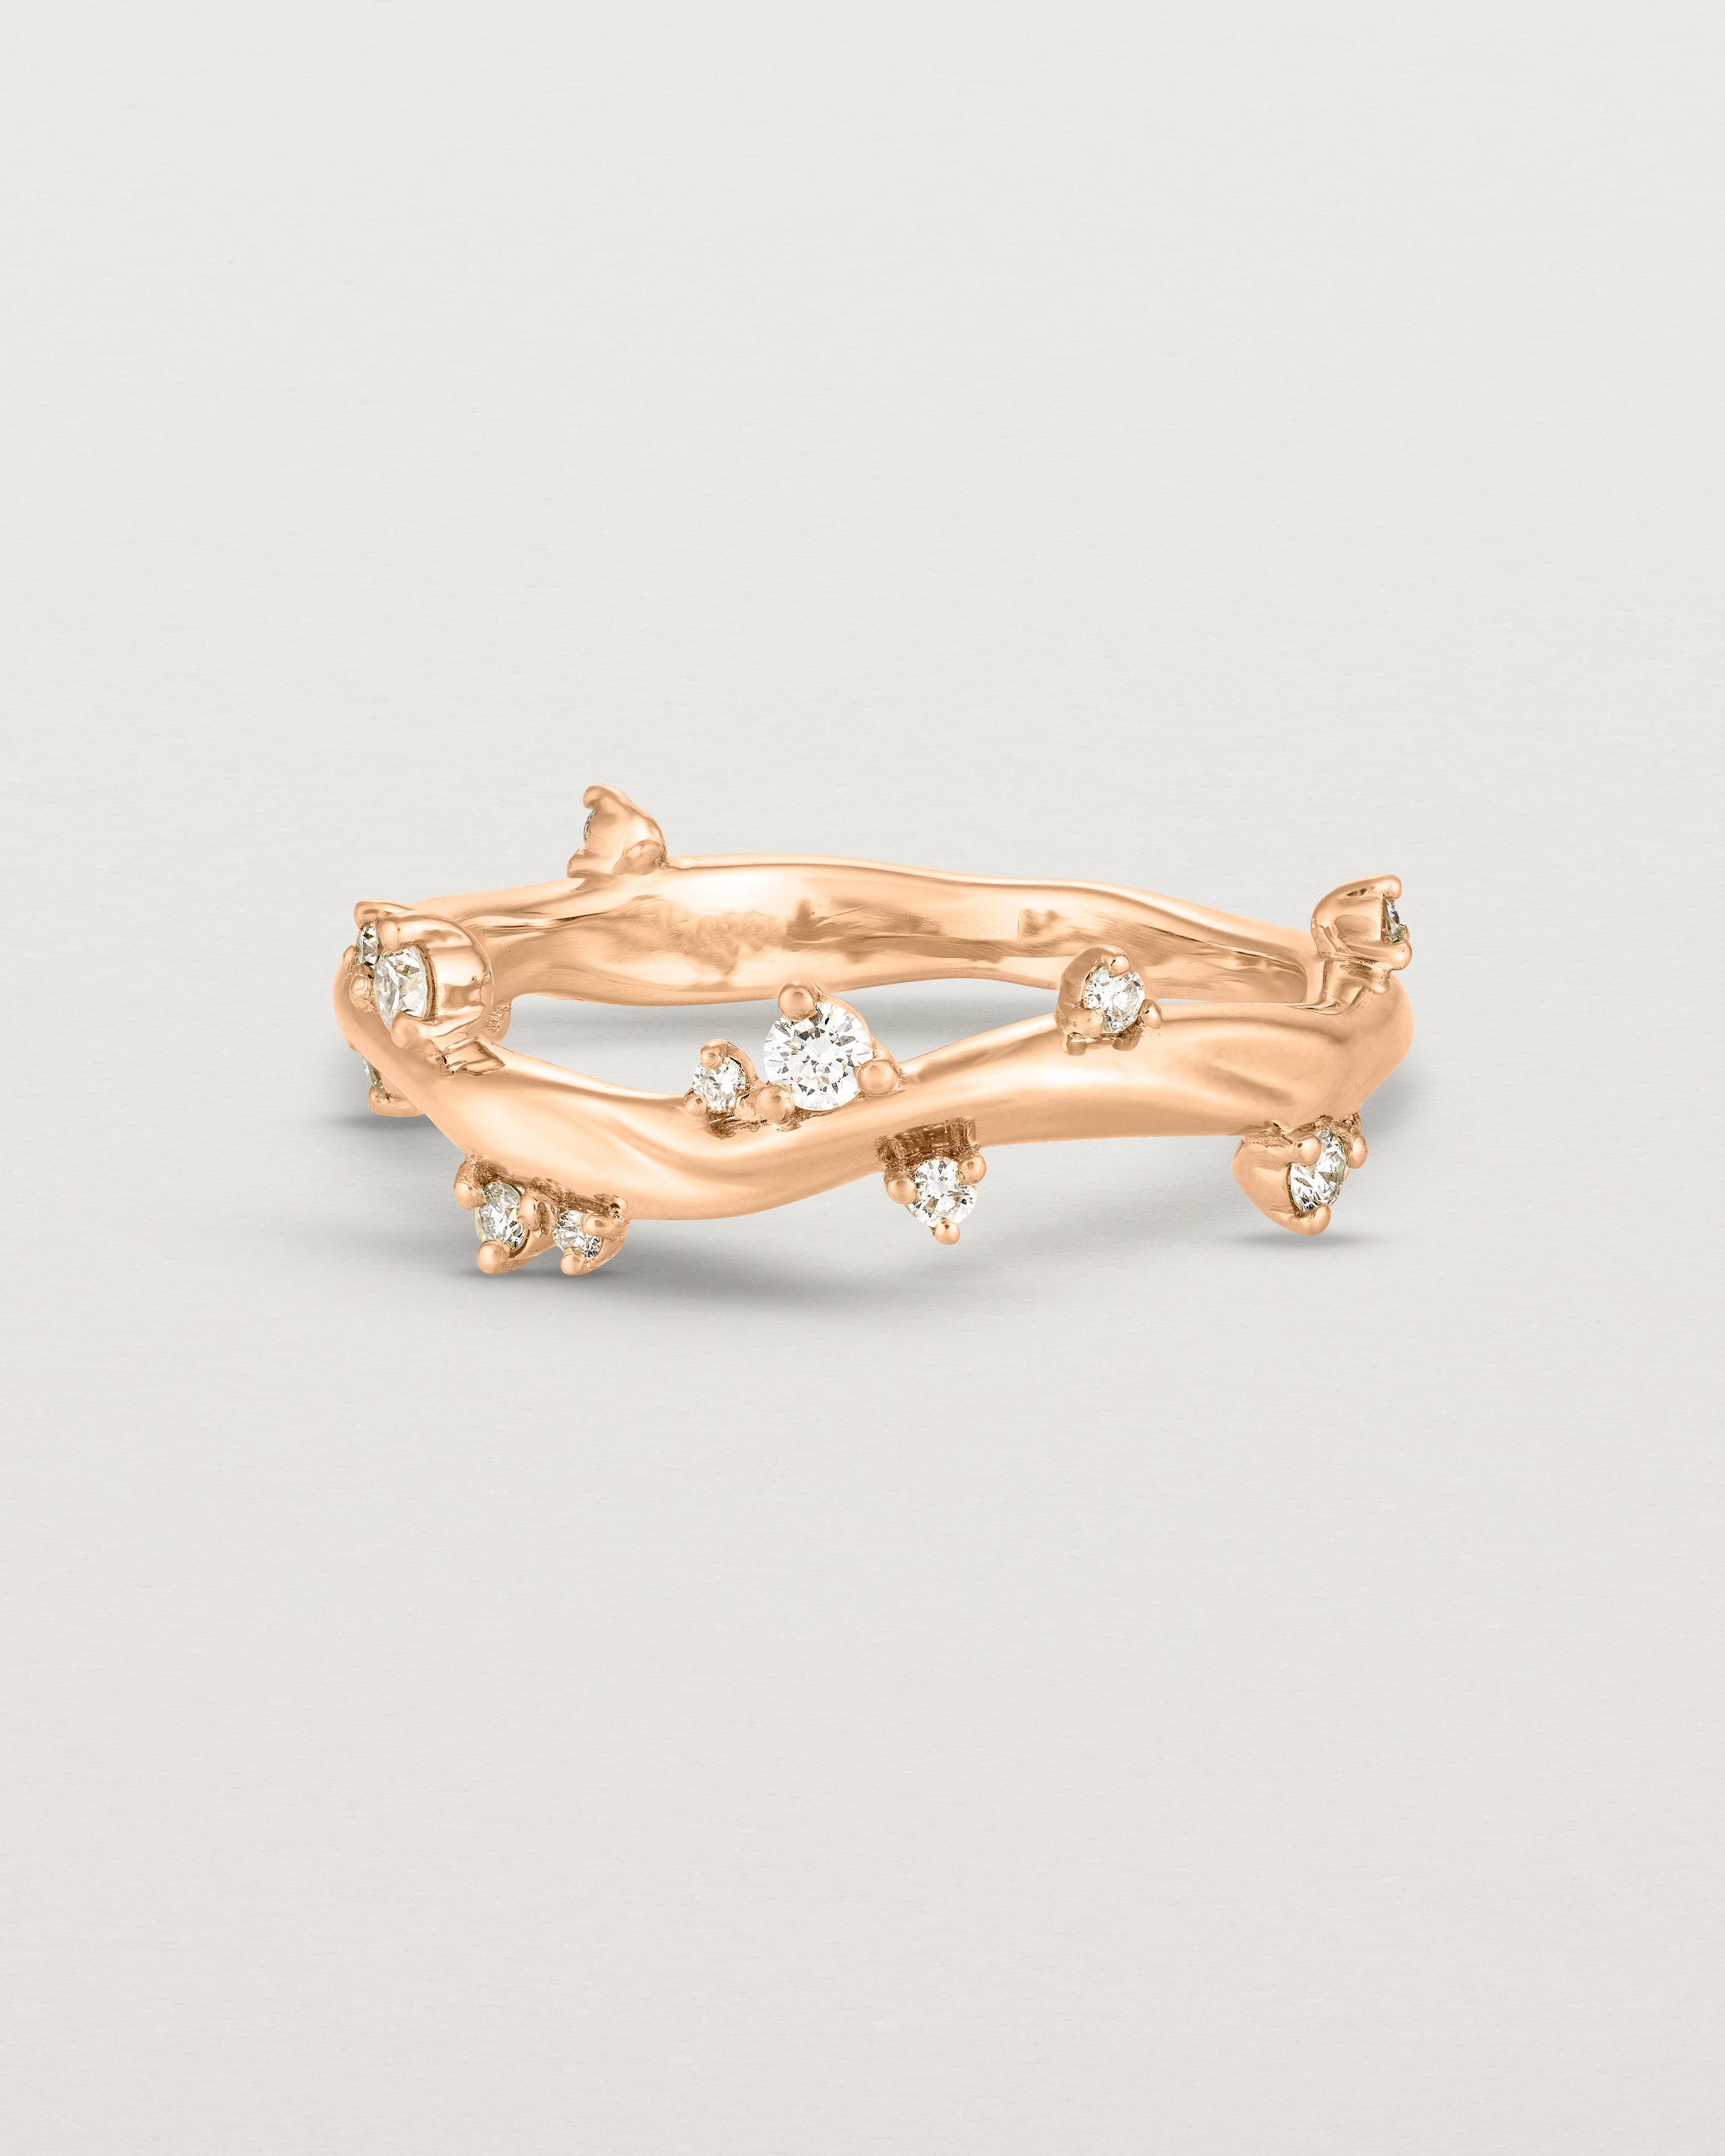 Product photo of the rose gold Ember ring with white diamonds scattered around the band.